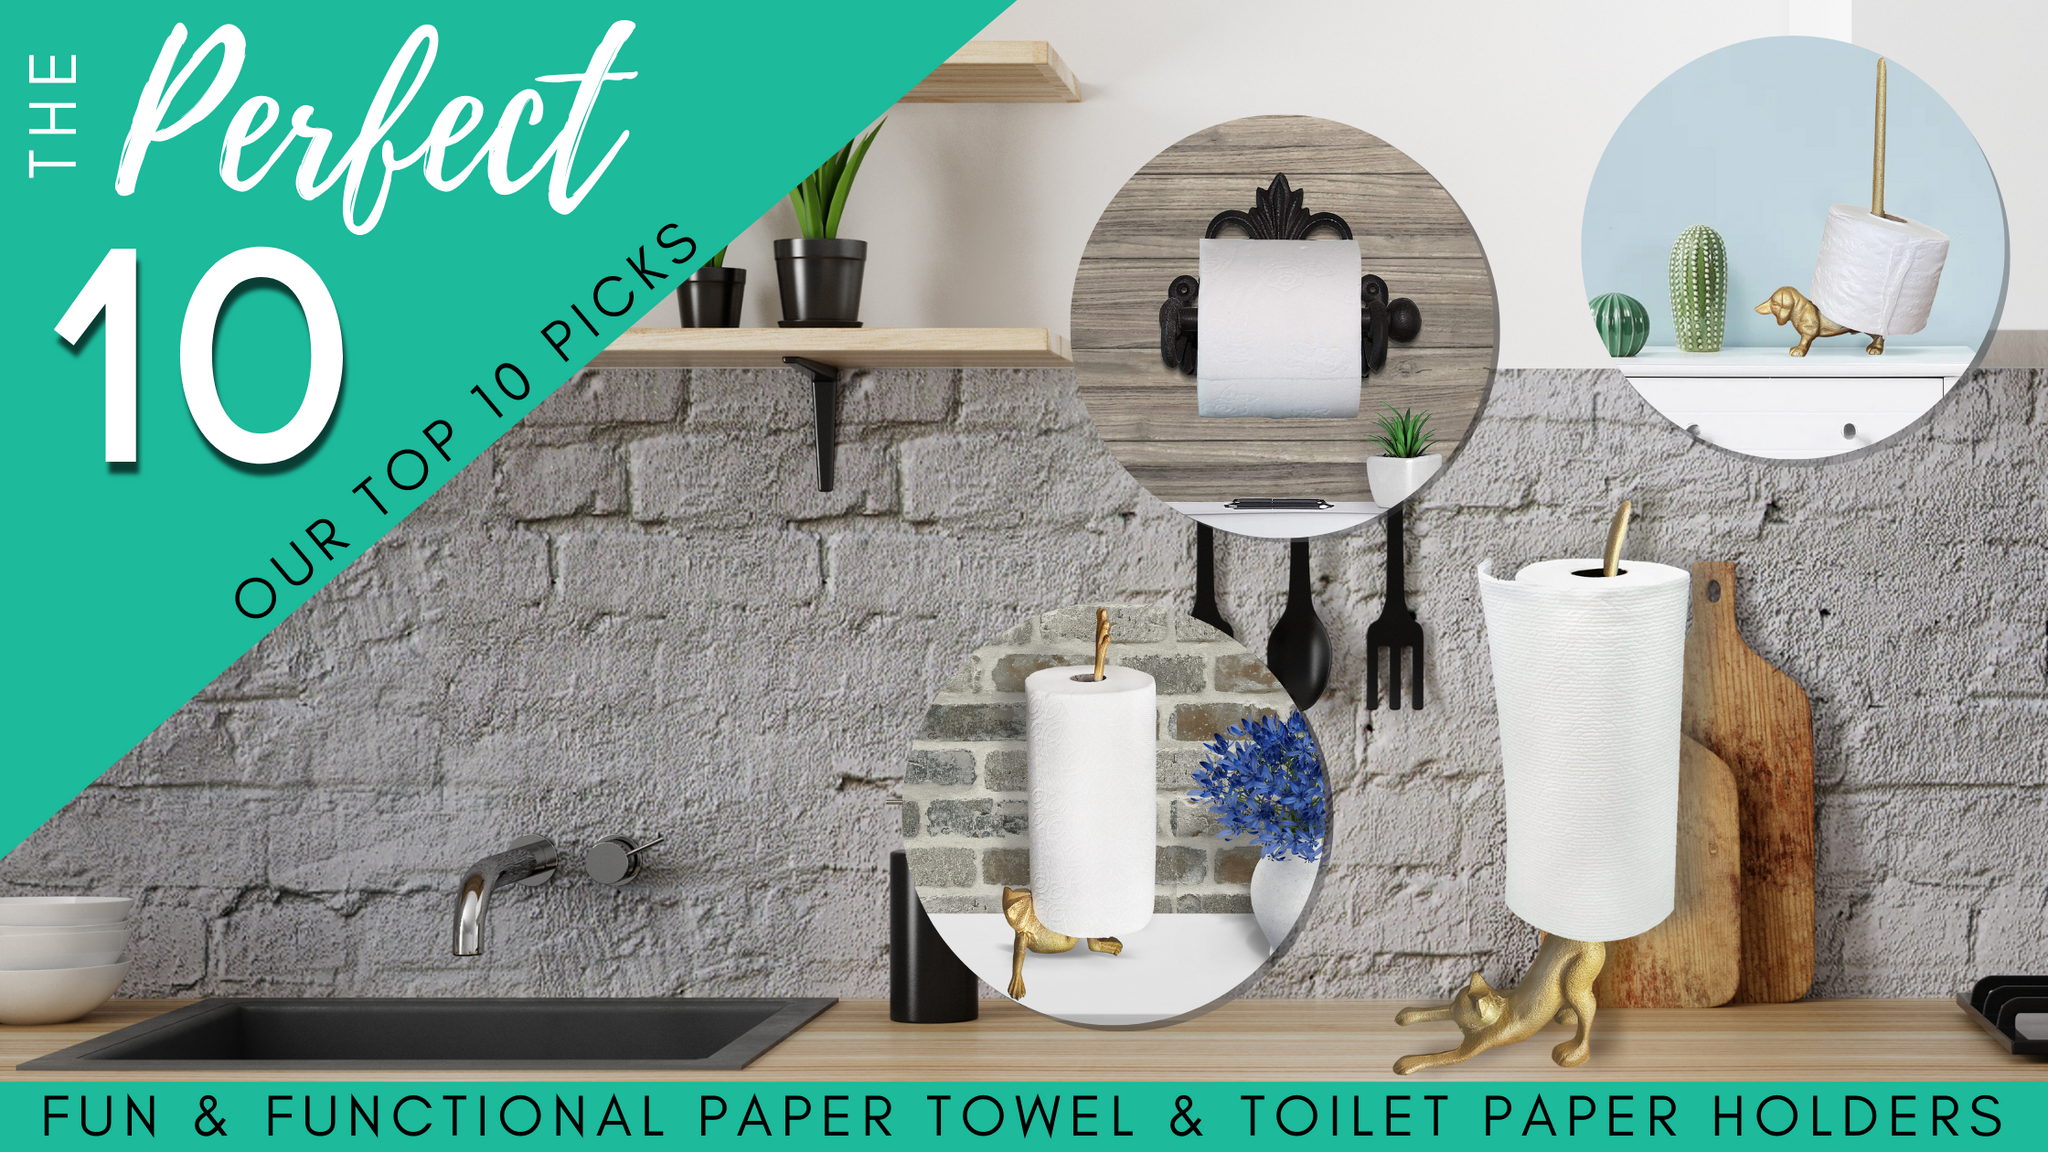 The PERFECT 10! Our top 10 picks for FUN & FUNctional Paper Towel and Toilet Paper Holders